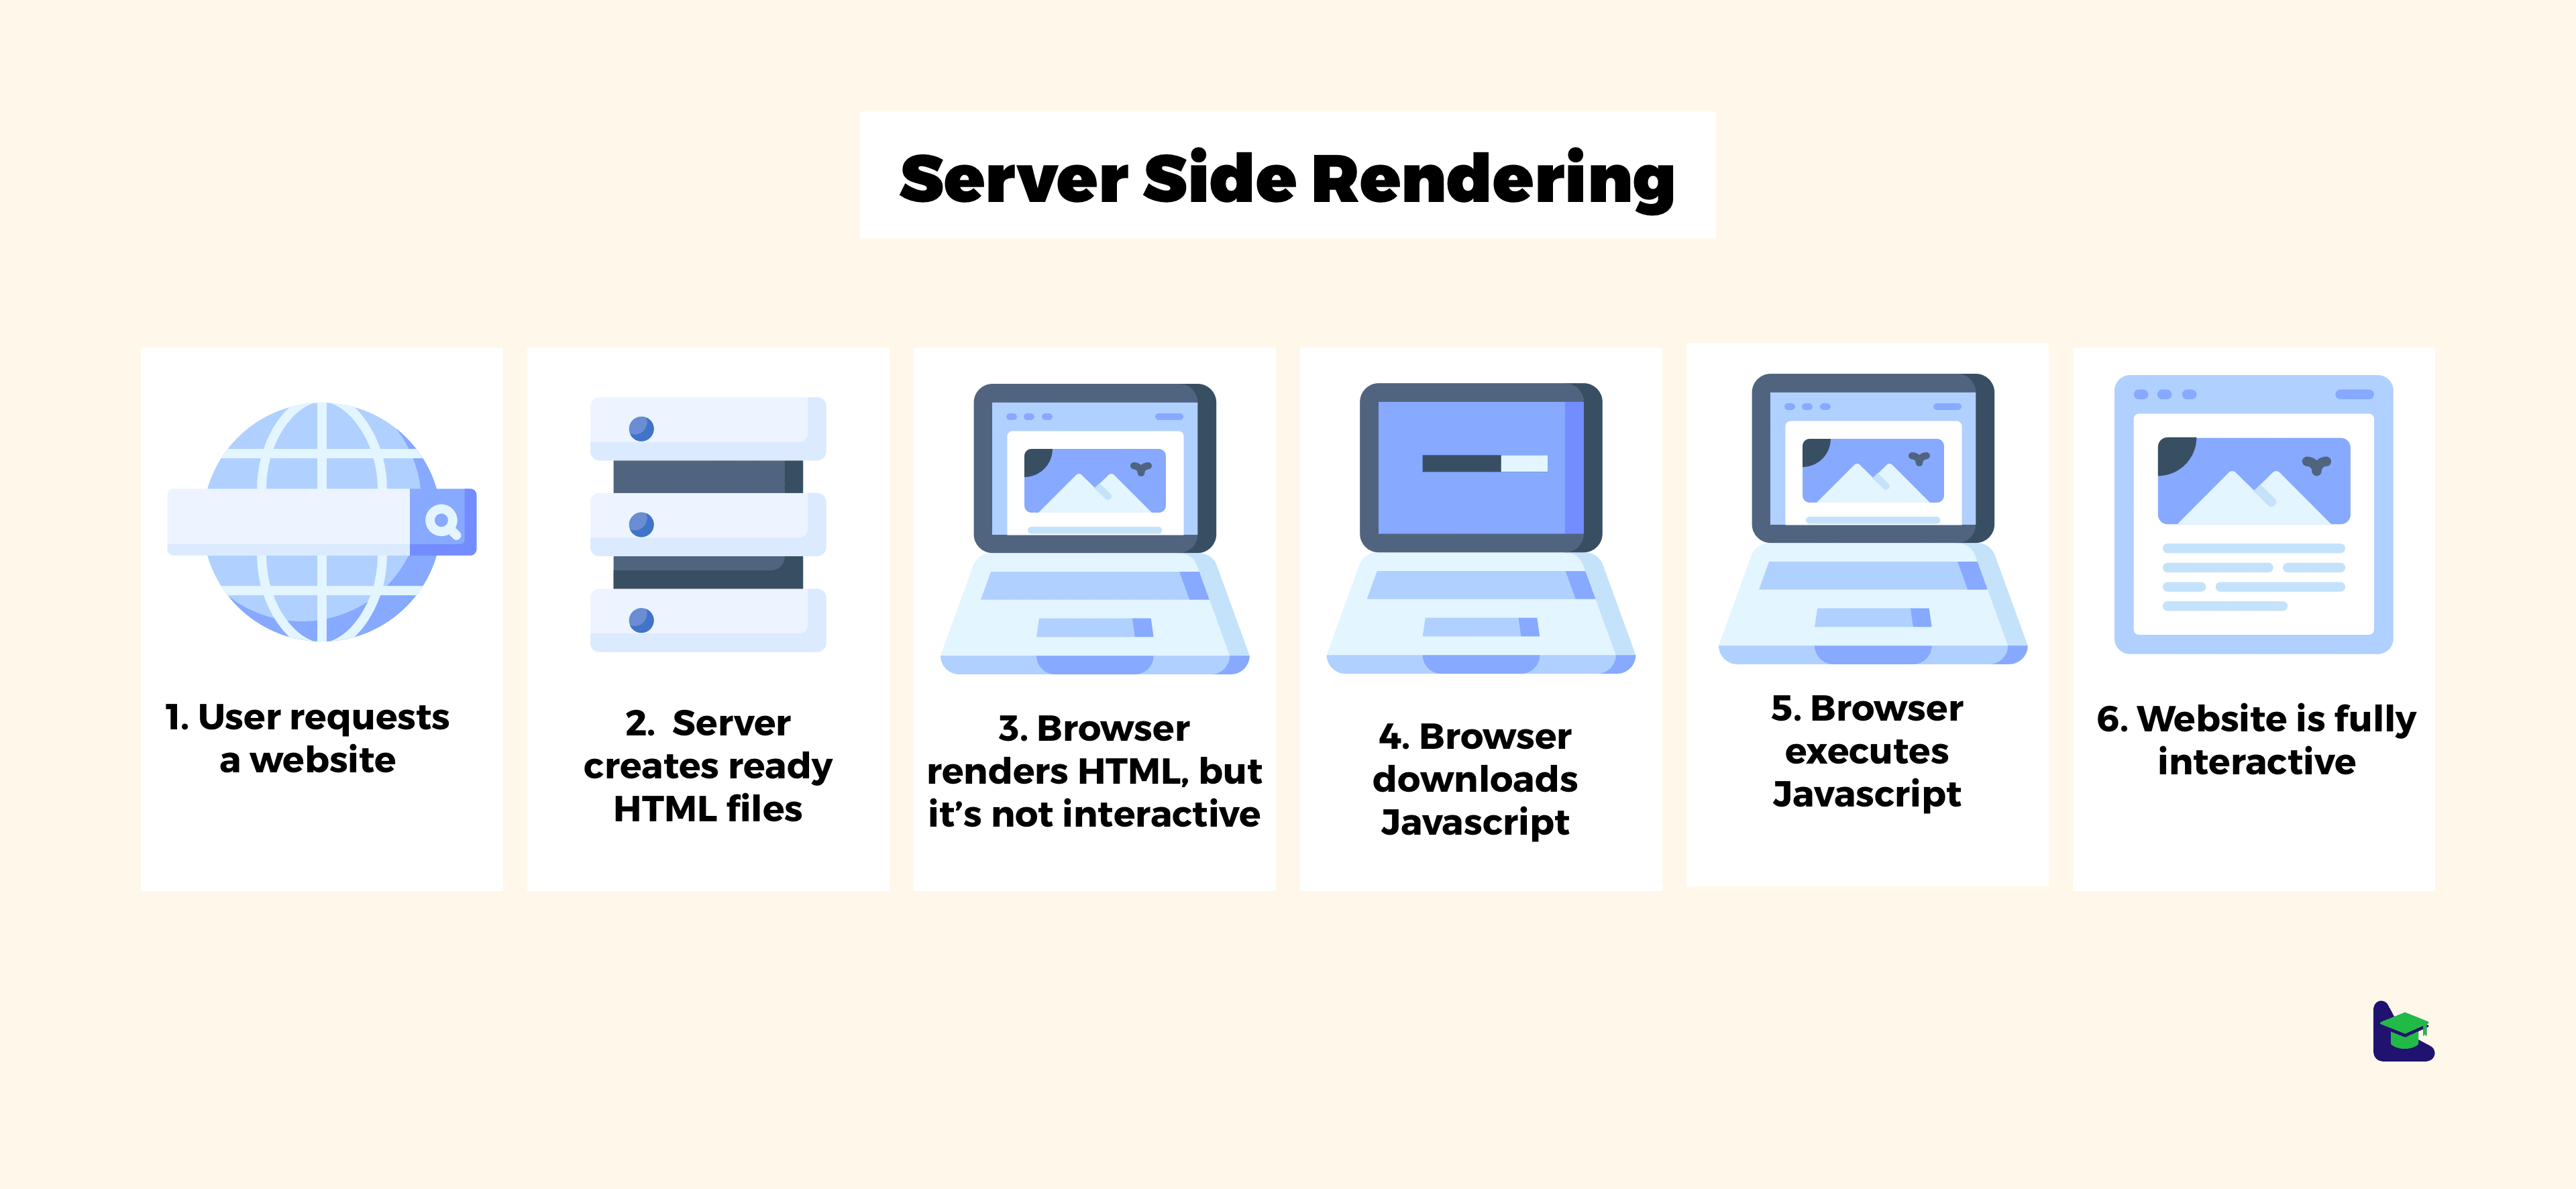 Diagram showing the steps of the server-side rendering of a website